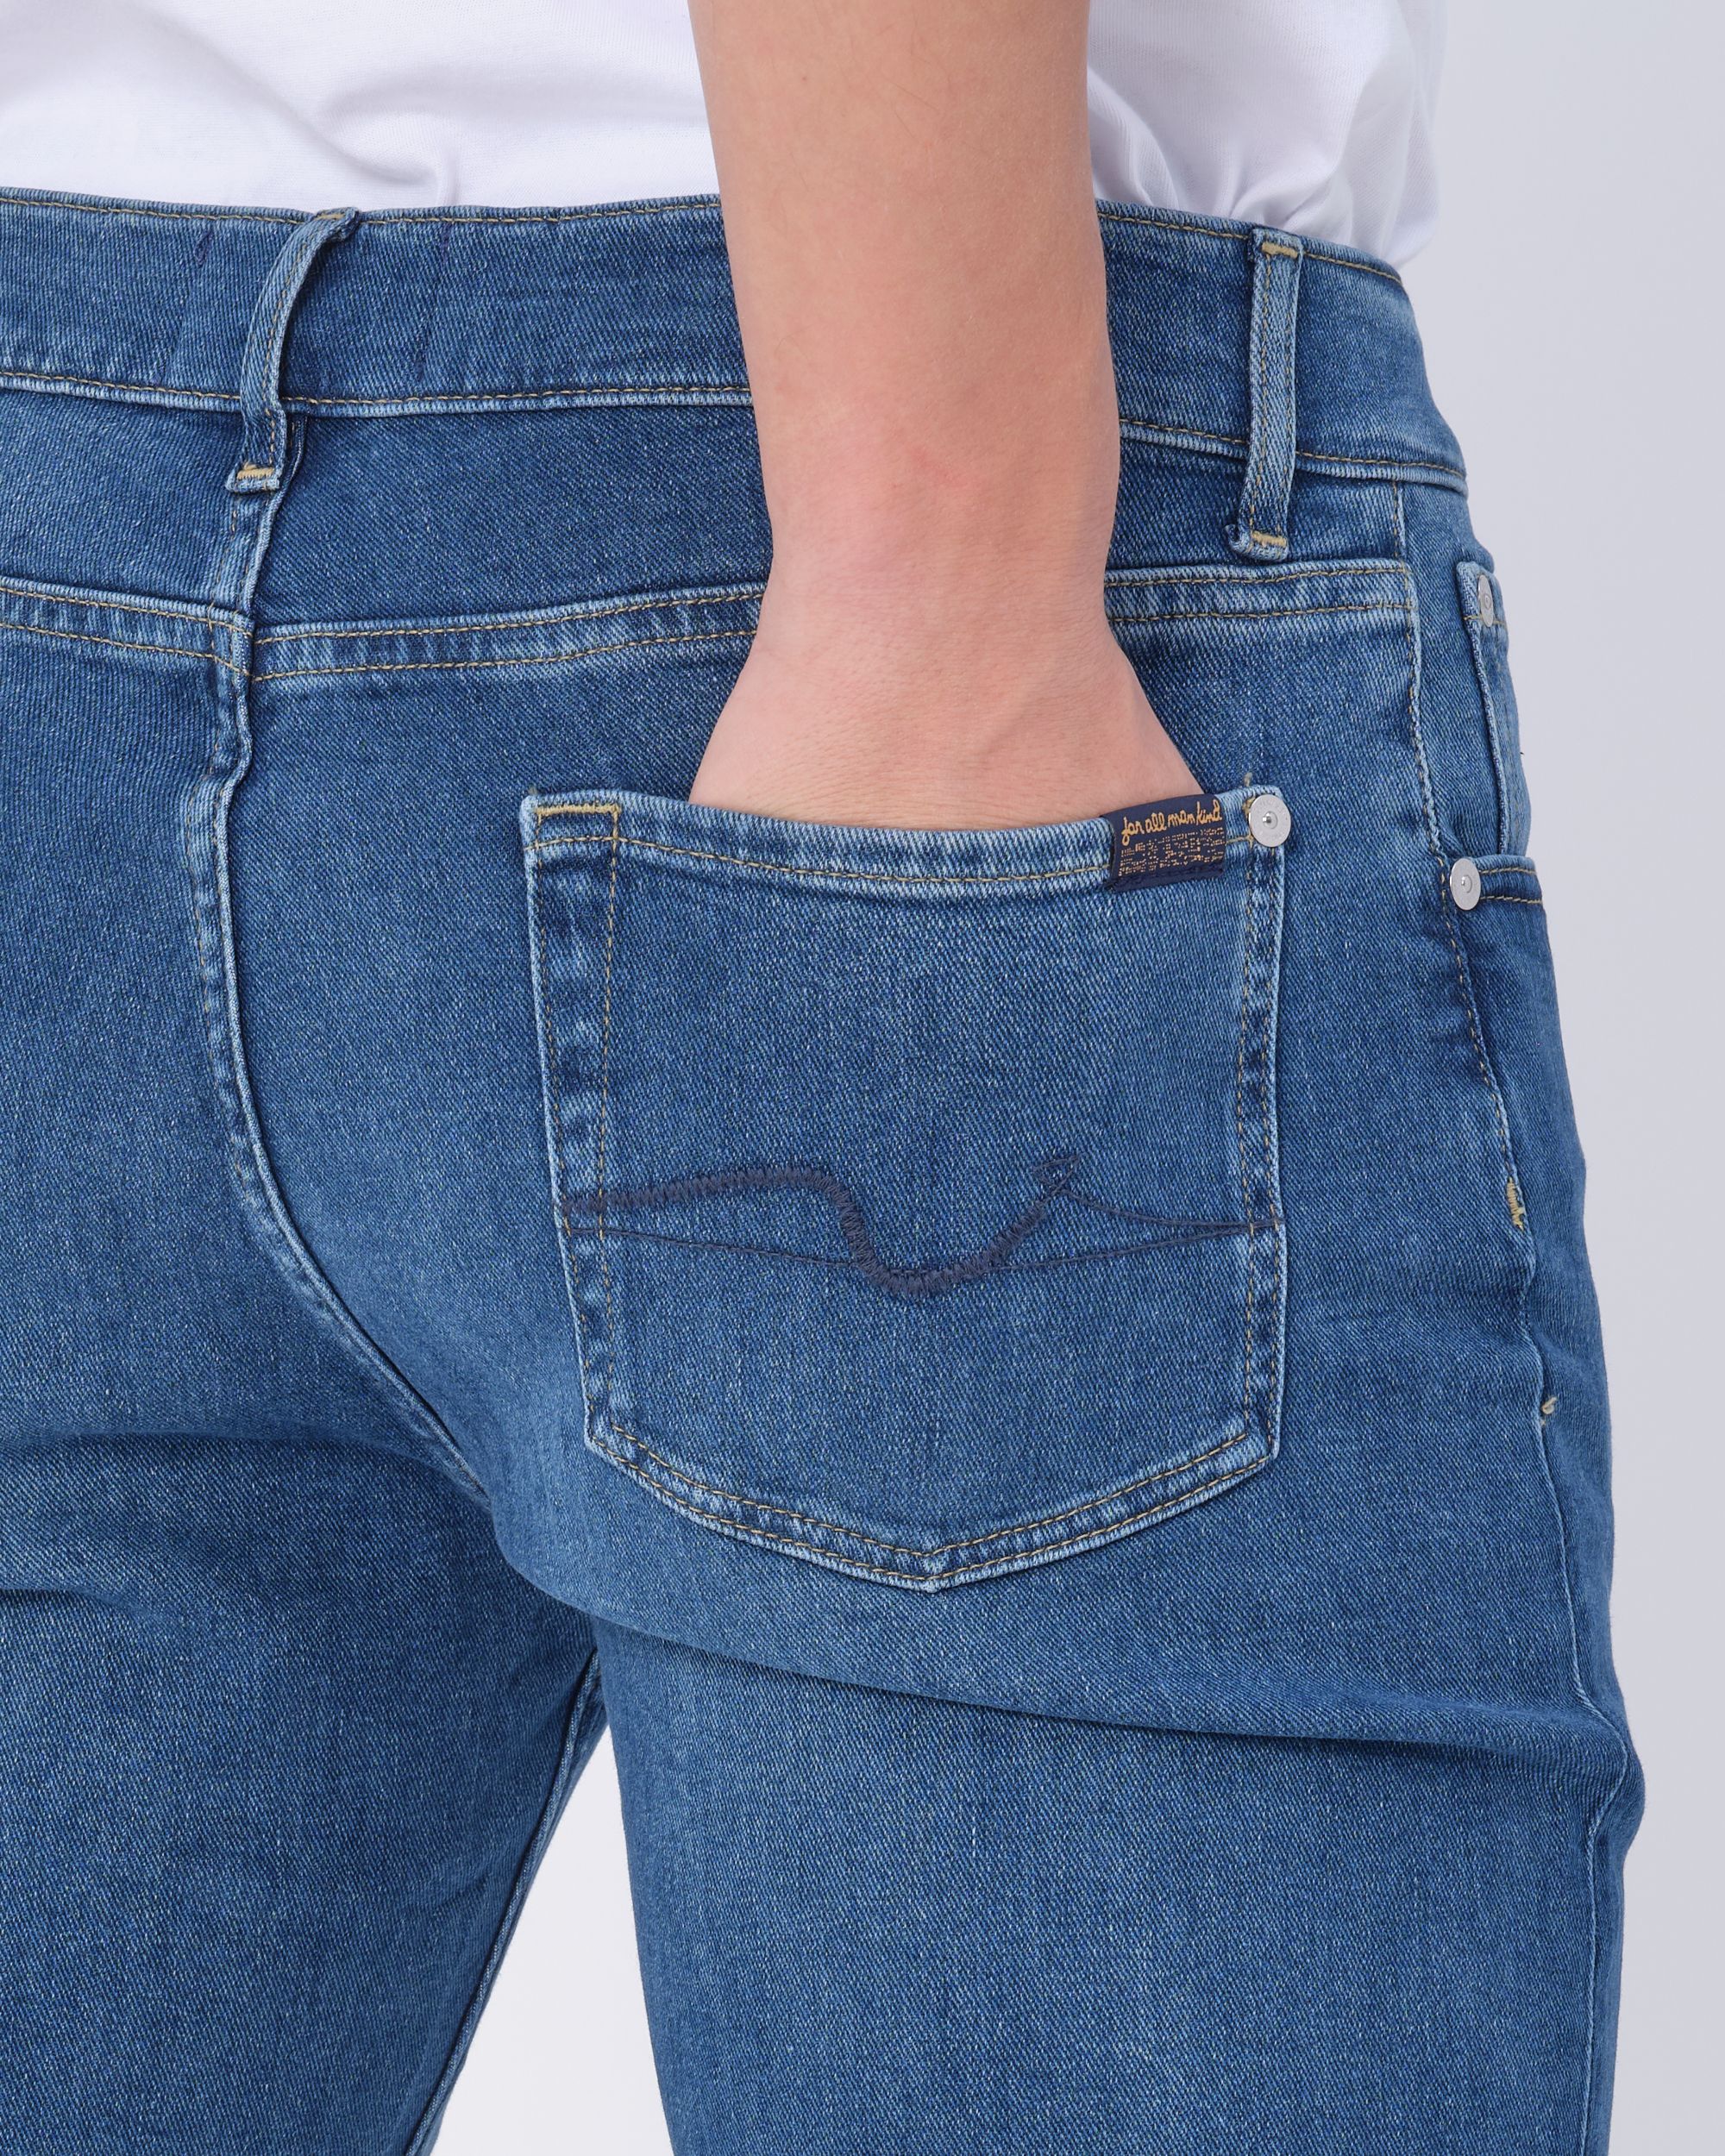 Seven for all mankind Jeans Blauw 083796-001-30